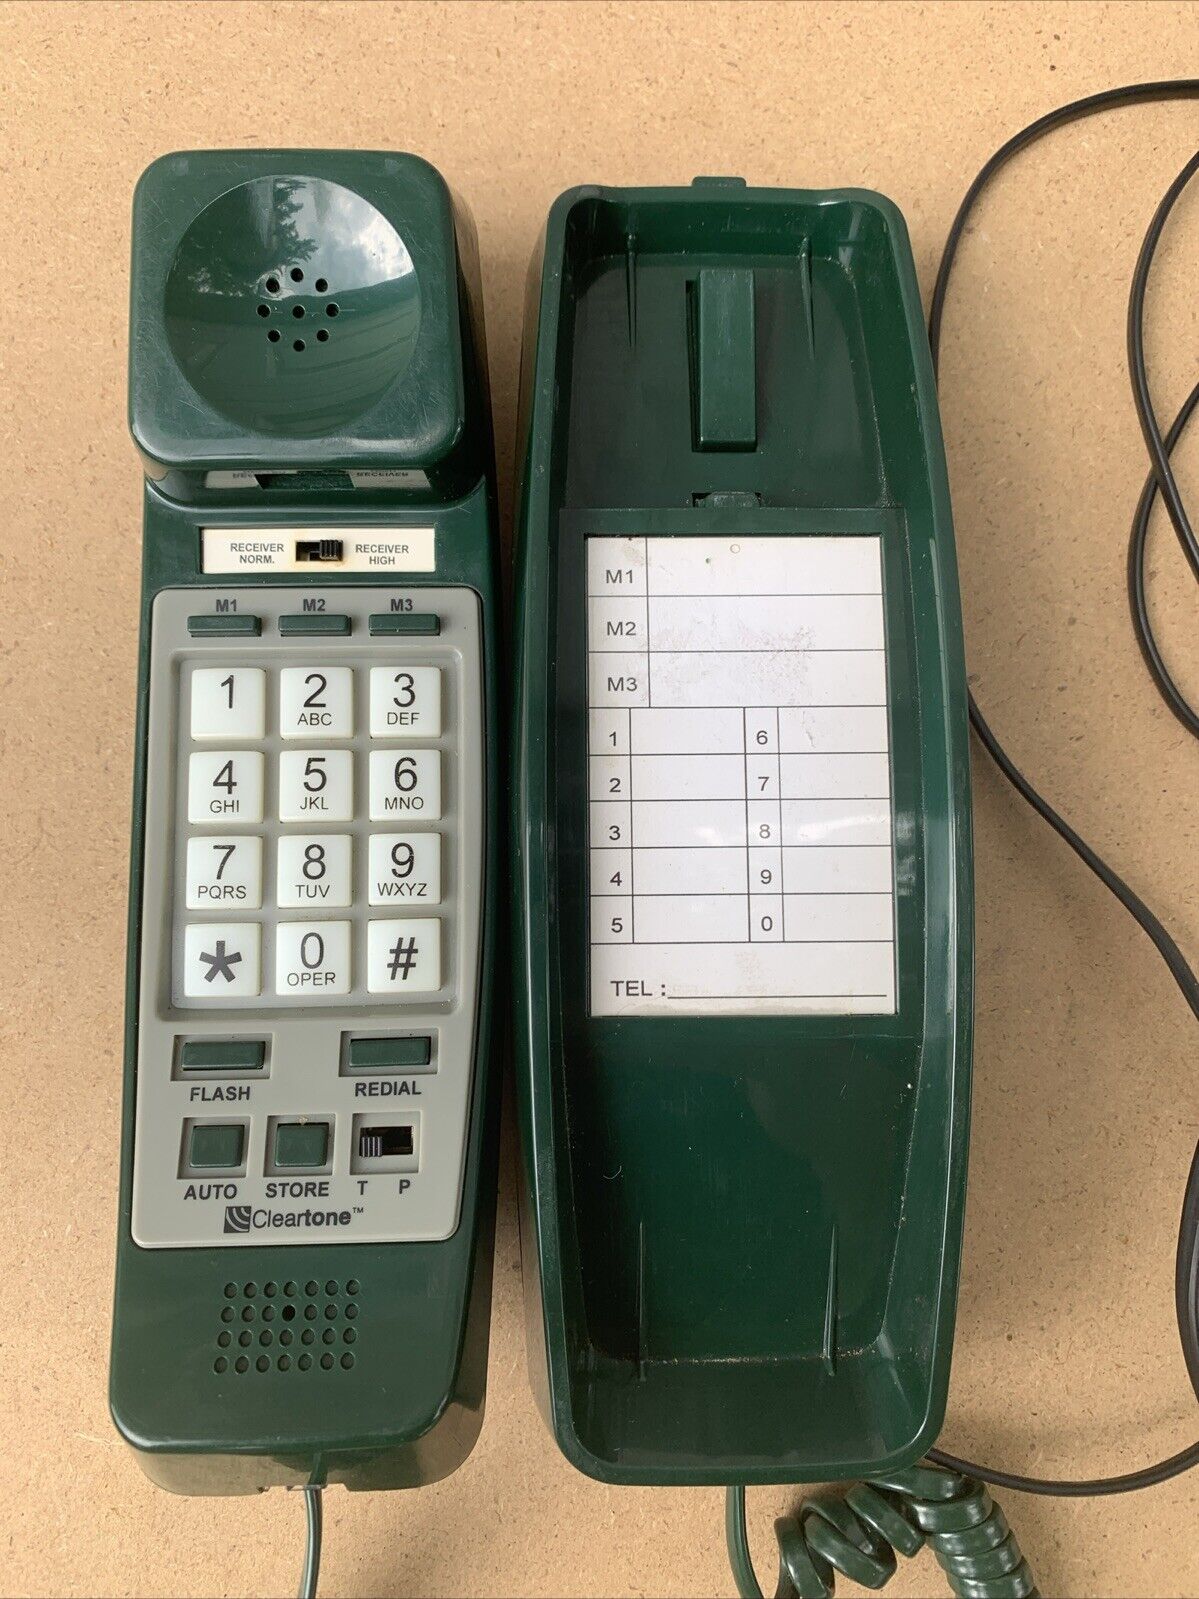 Cleartone CT-1000 Phone- Green - Used - Untested